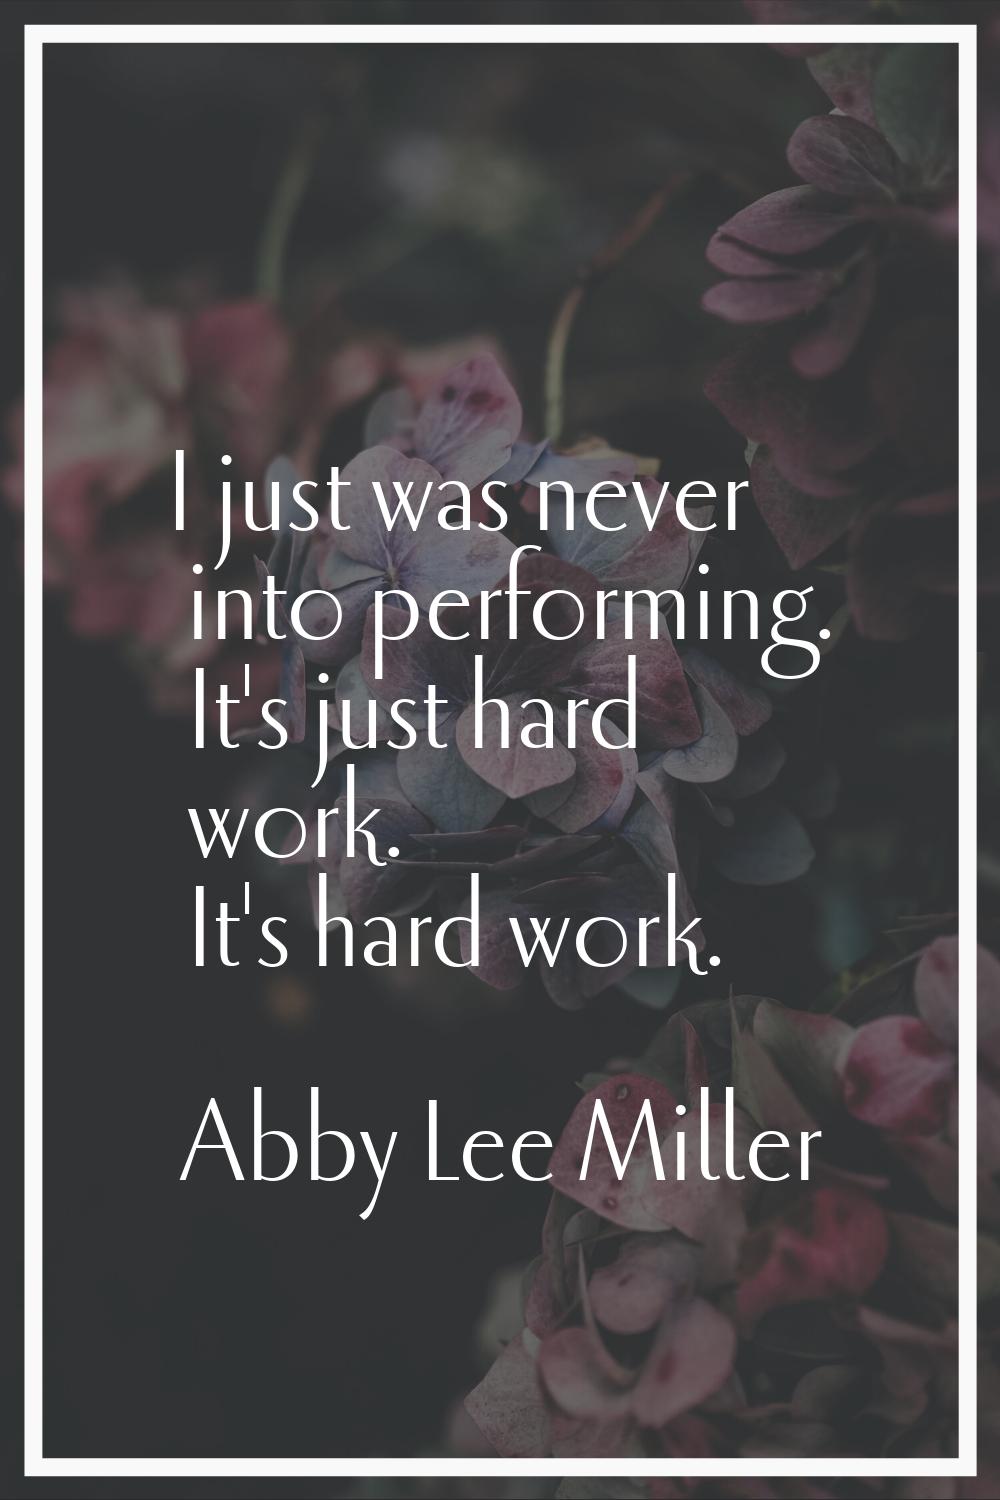 I just was never into performing. It's just hard work. It's hard work.